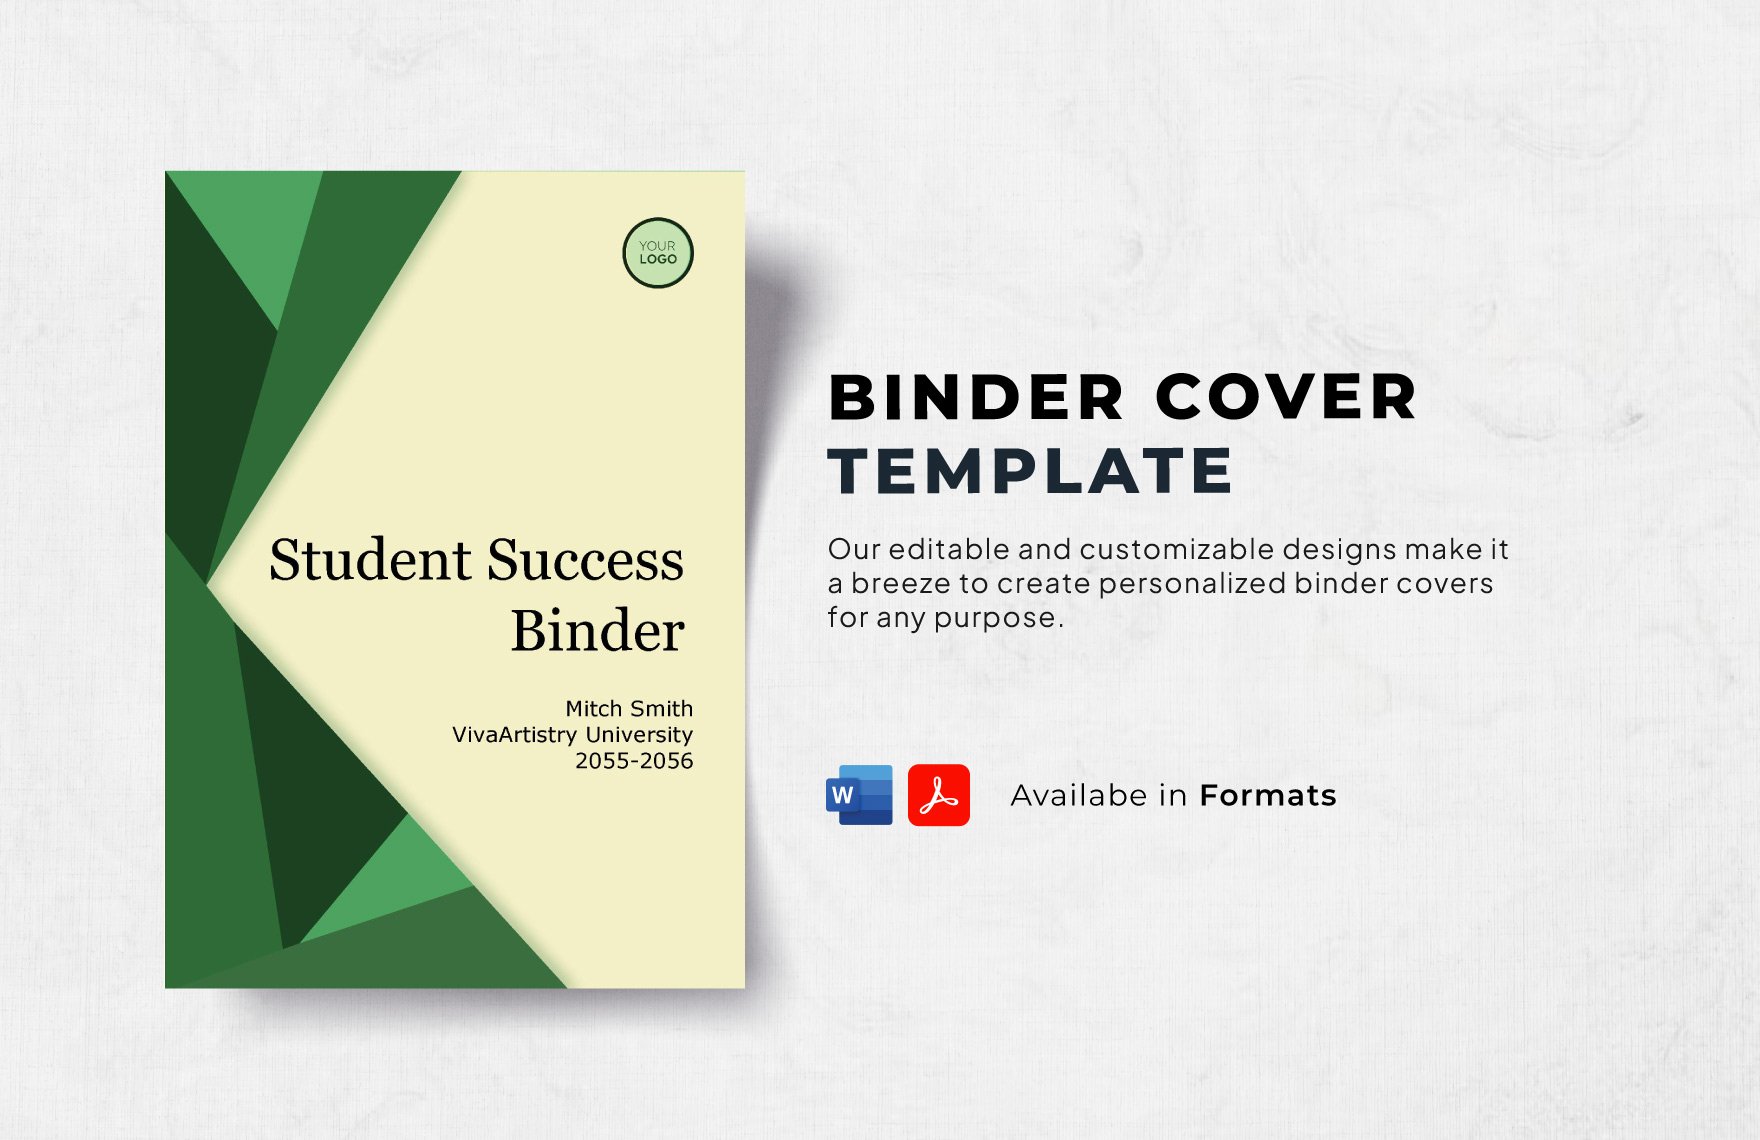 Binder Cover Template